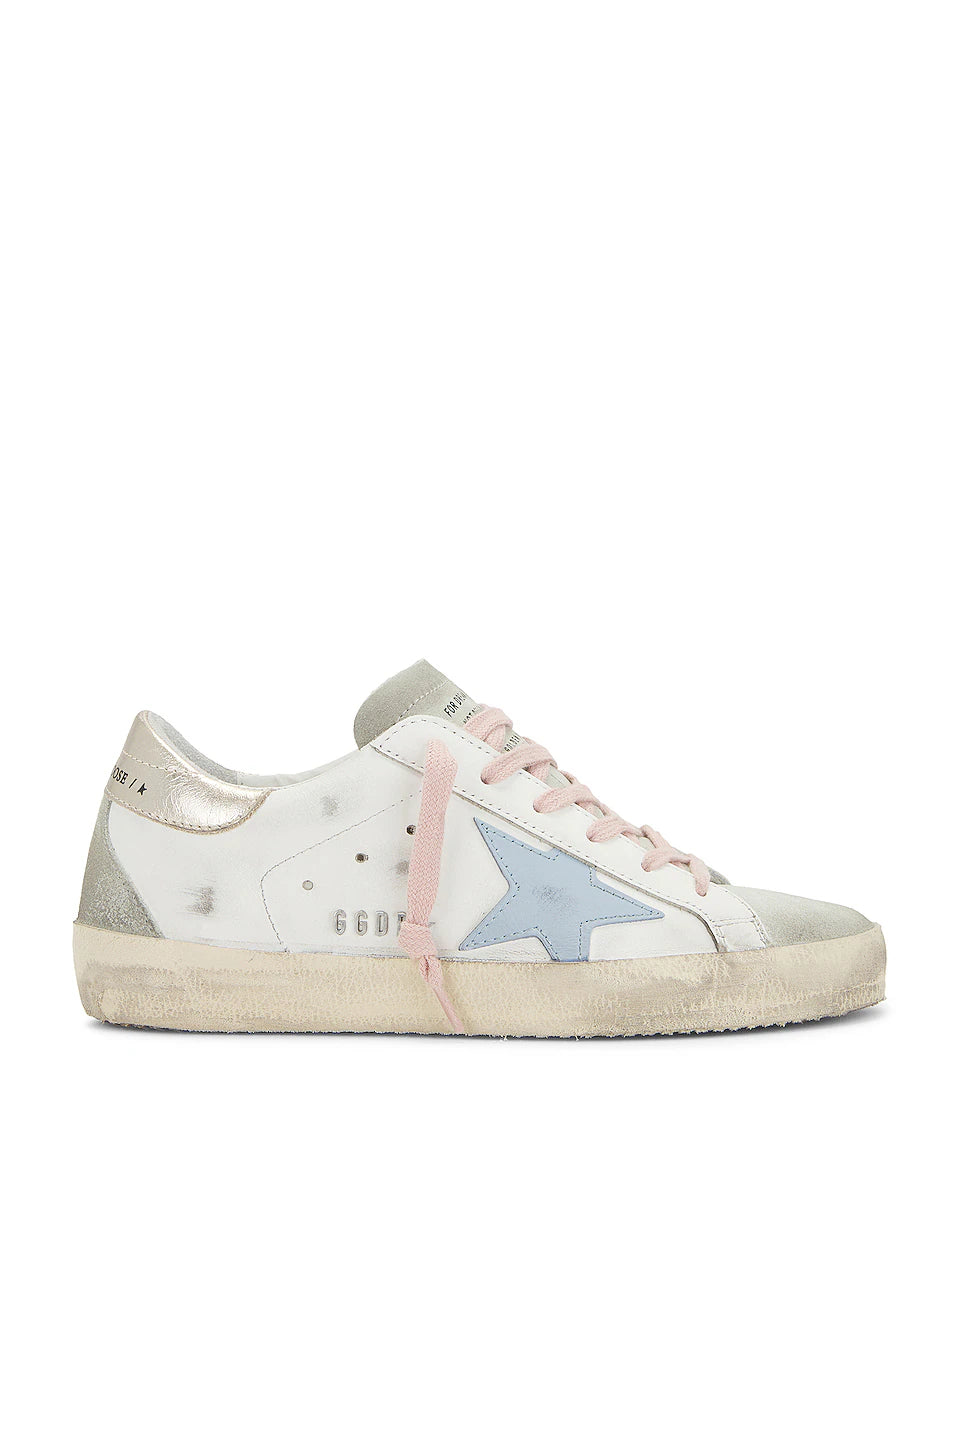 Golden Goose Deluxe Brand Super Star Leather Shoes